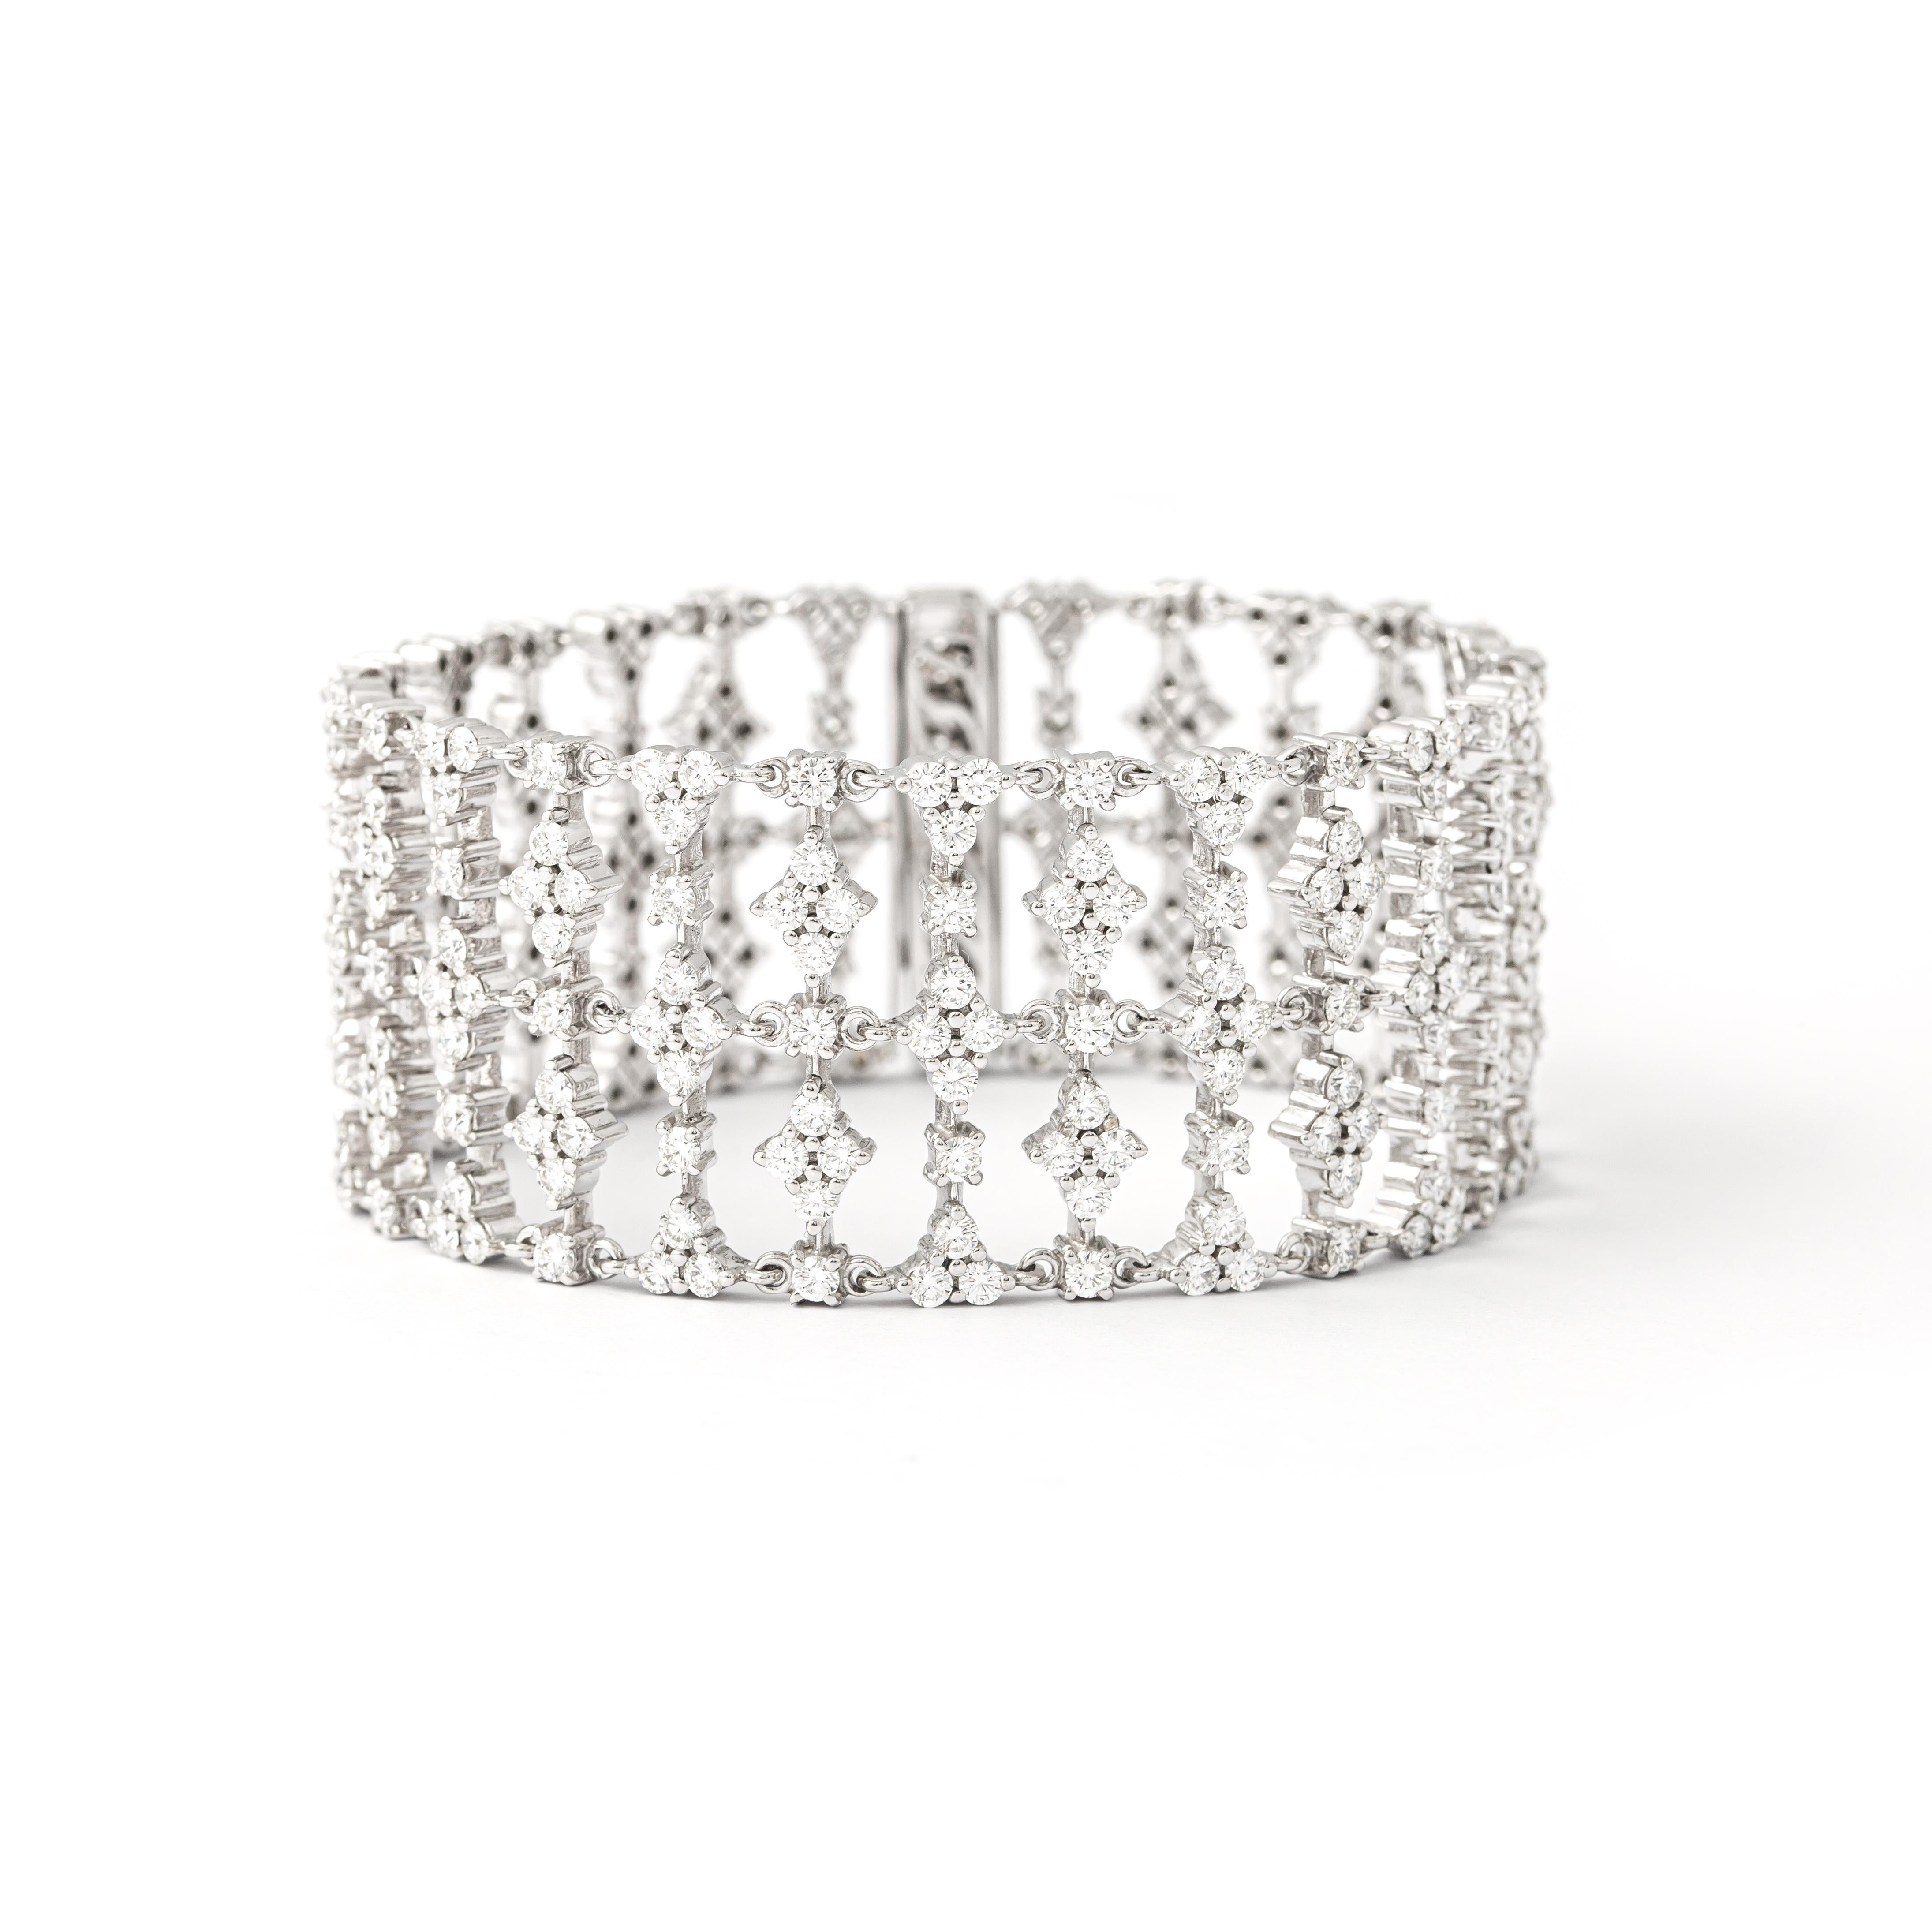 Bracelet in 18kt white gold set with 335 diamonds 13.12 cts.

Length: 17.50 centimeters (6.89 inches).

Total weight: 62.38 grams.

Width : 2.80 centimeters (1.10 inches)